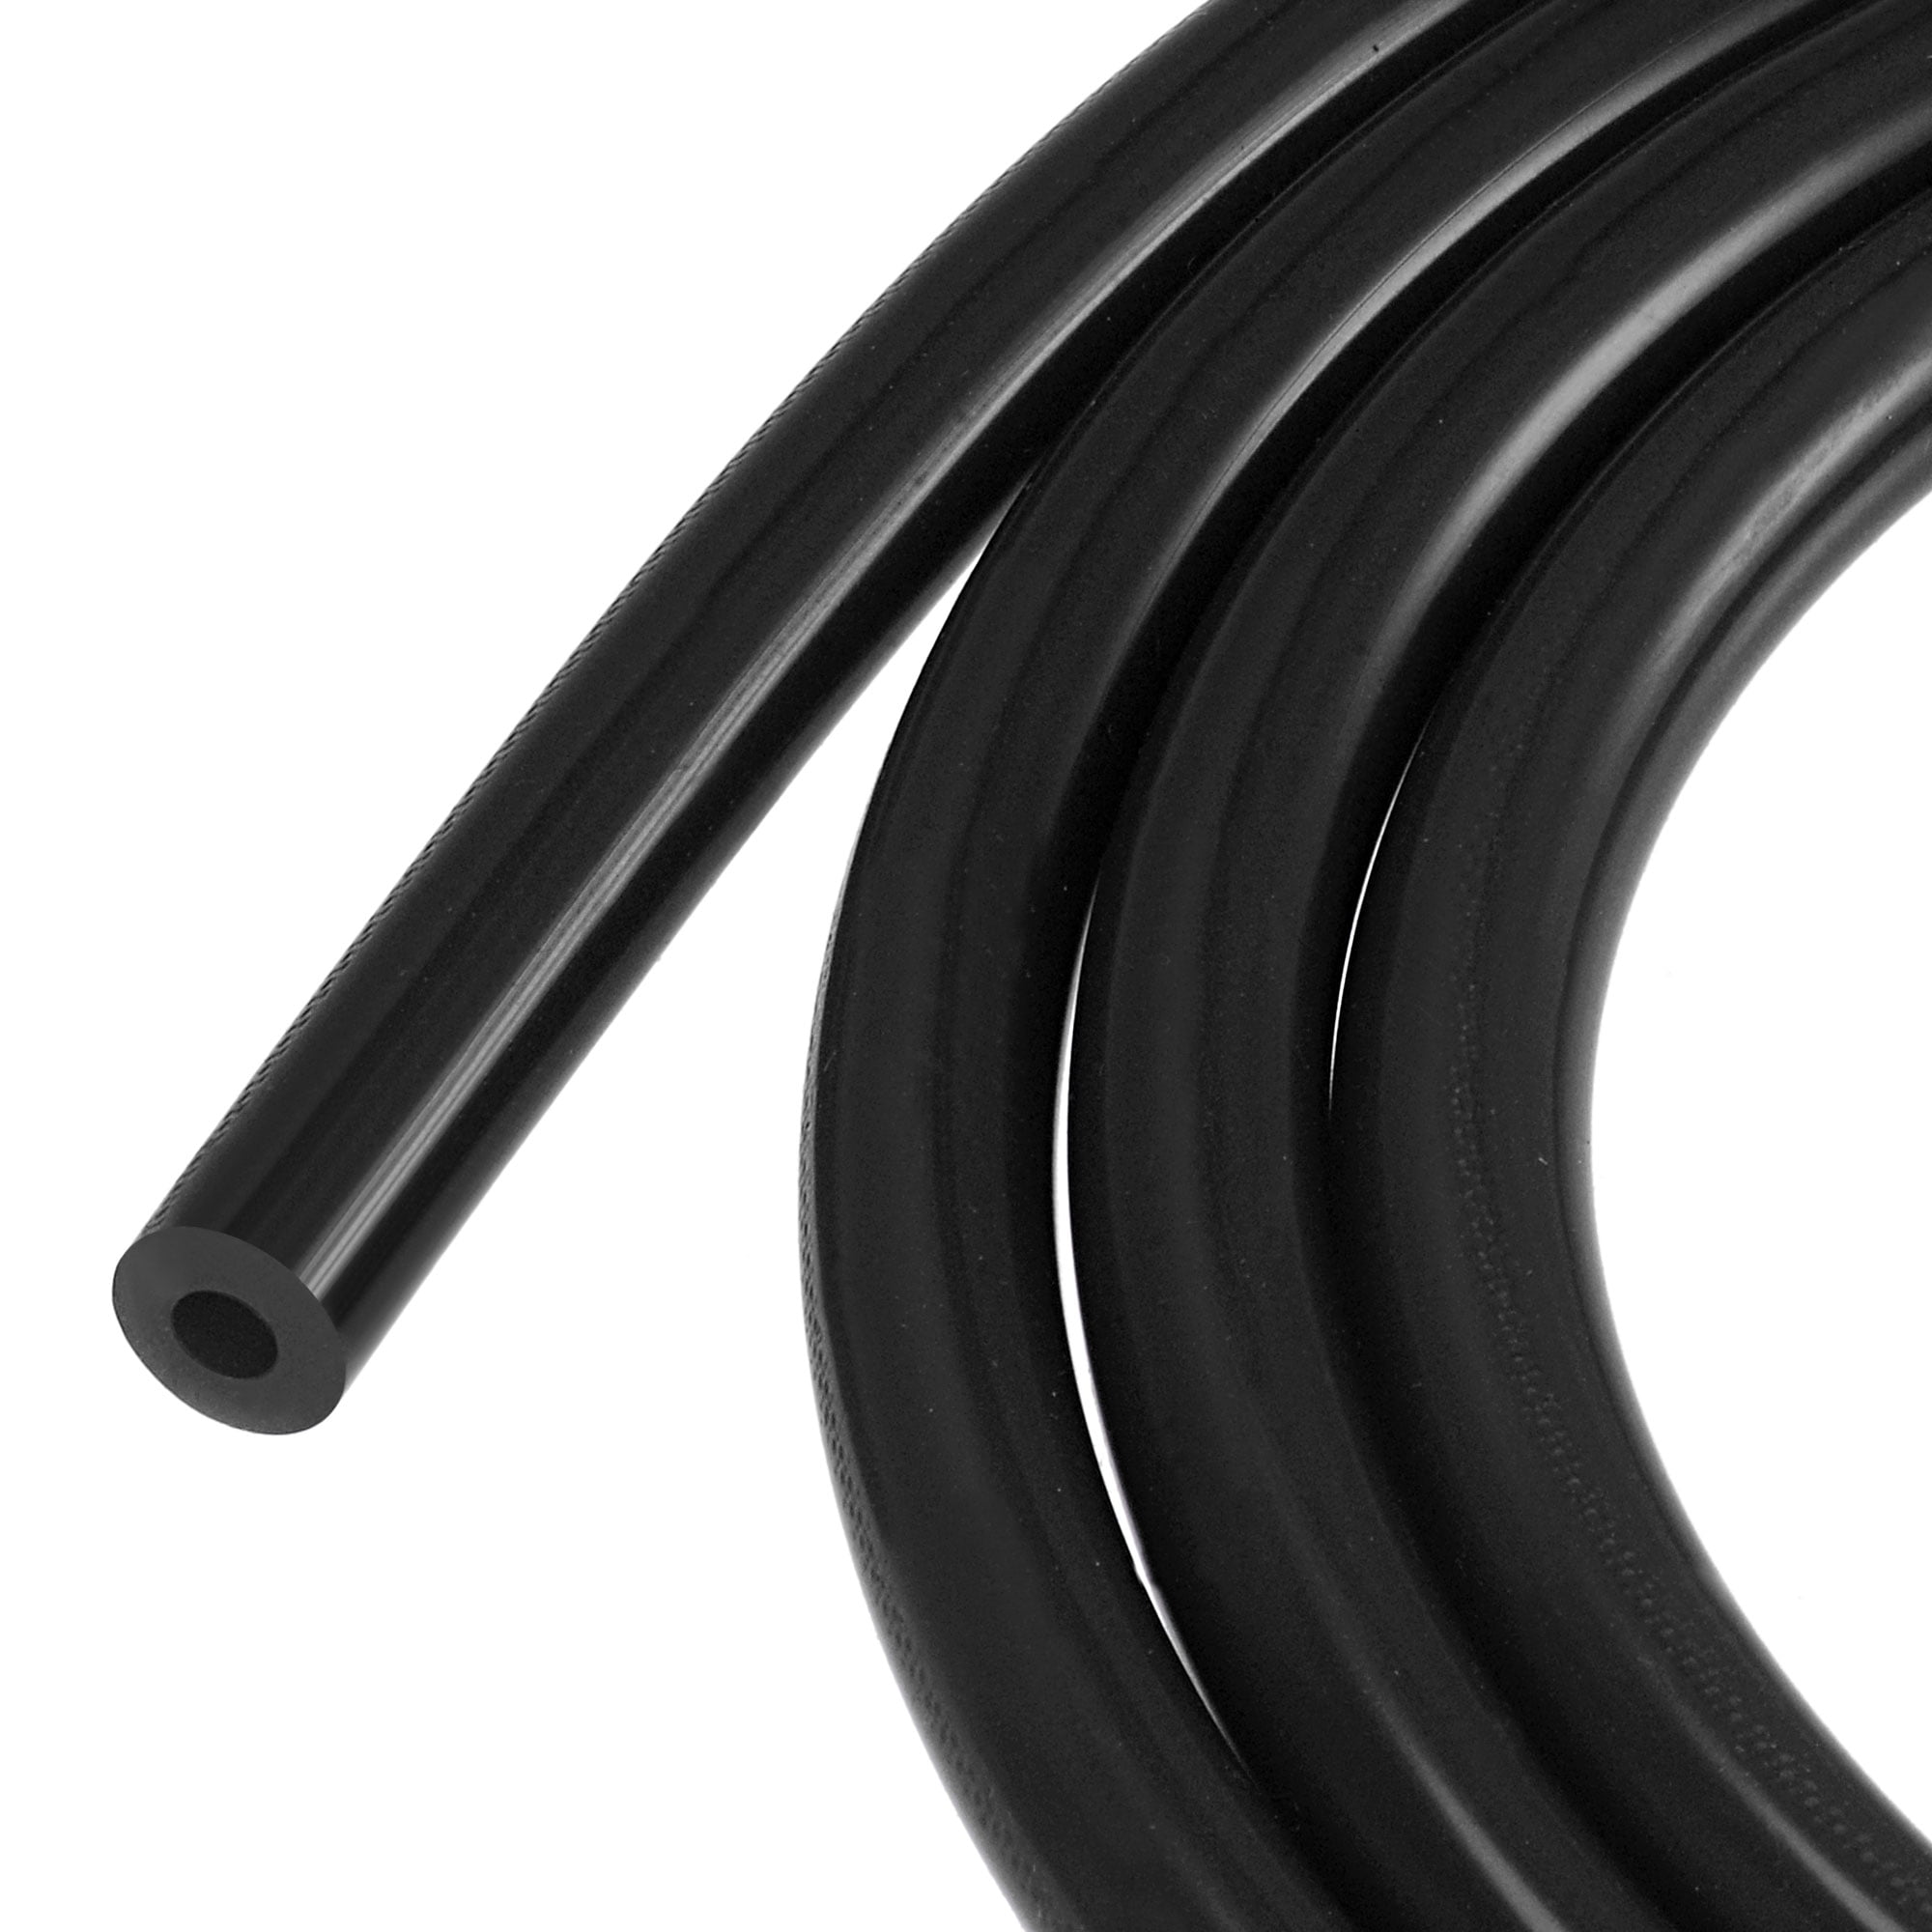 3/16" 5mm Silicone Vacuum Tube Hose Tubing Pipe Price for 10FT Black